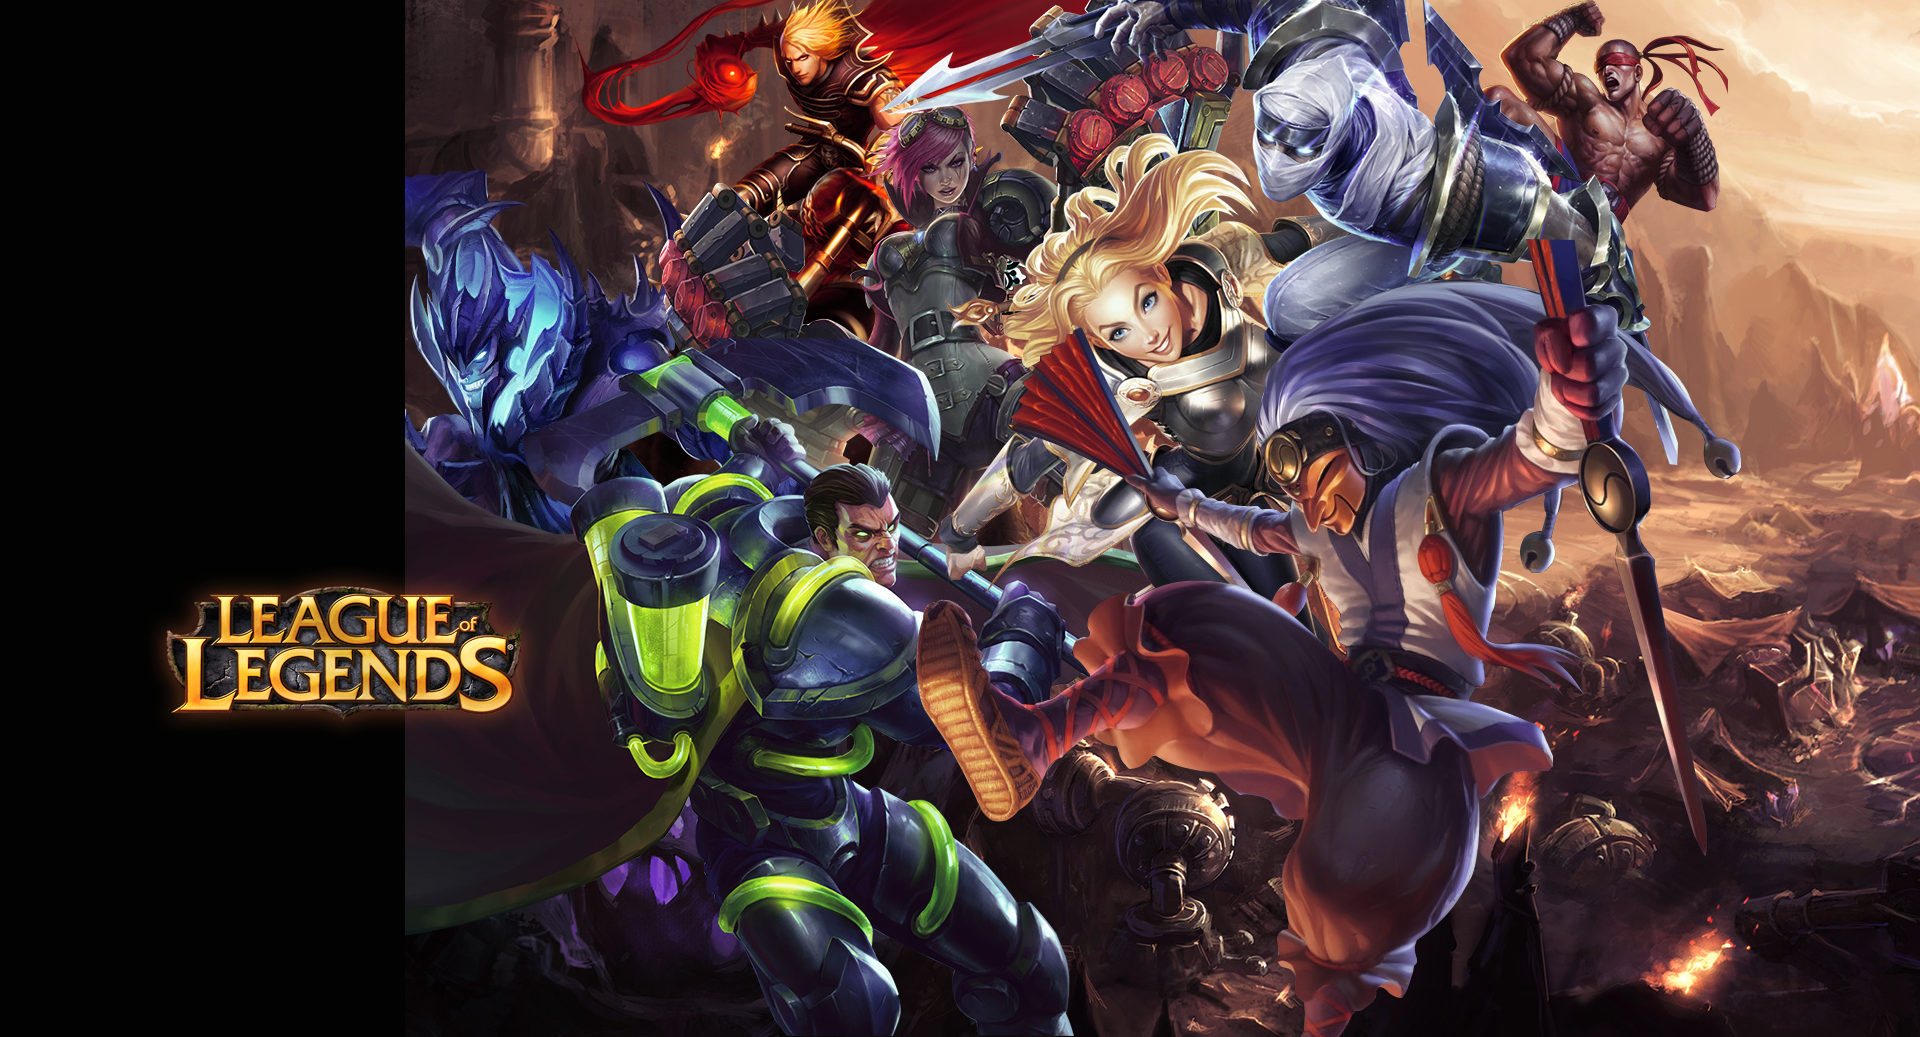 Free Download Hd Wallpapers League Of Legends Awesome Wallpaper 19 X 1037 2531 Kb 19x1037 For Your Desktop Mobile Tablet Explore 49 Custom League Of Legends Wallpaper League Of Legends Wallpaper Maker